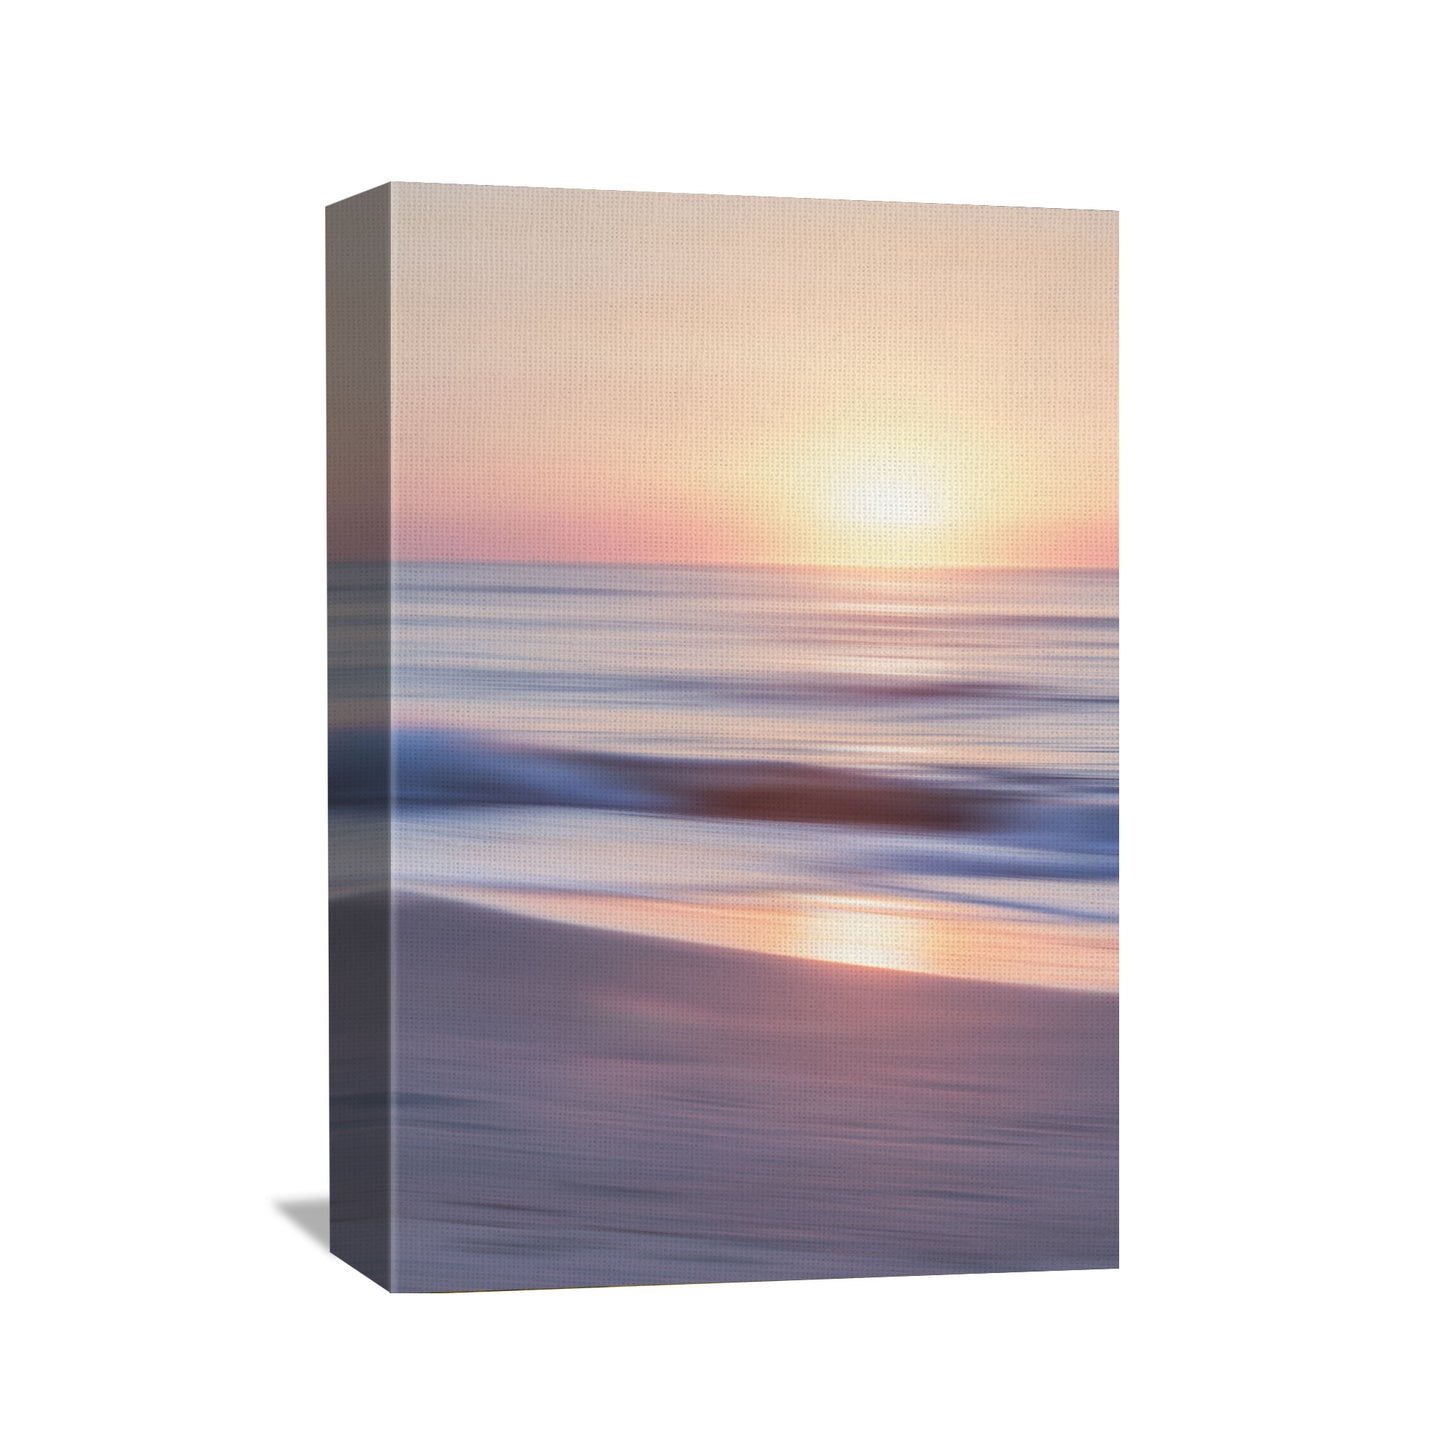 Coastal wall art of Ocean Sunrise, depicting a tranquil dawn scene from the Outer Banks, available in canvas format with various sizes.